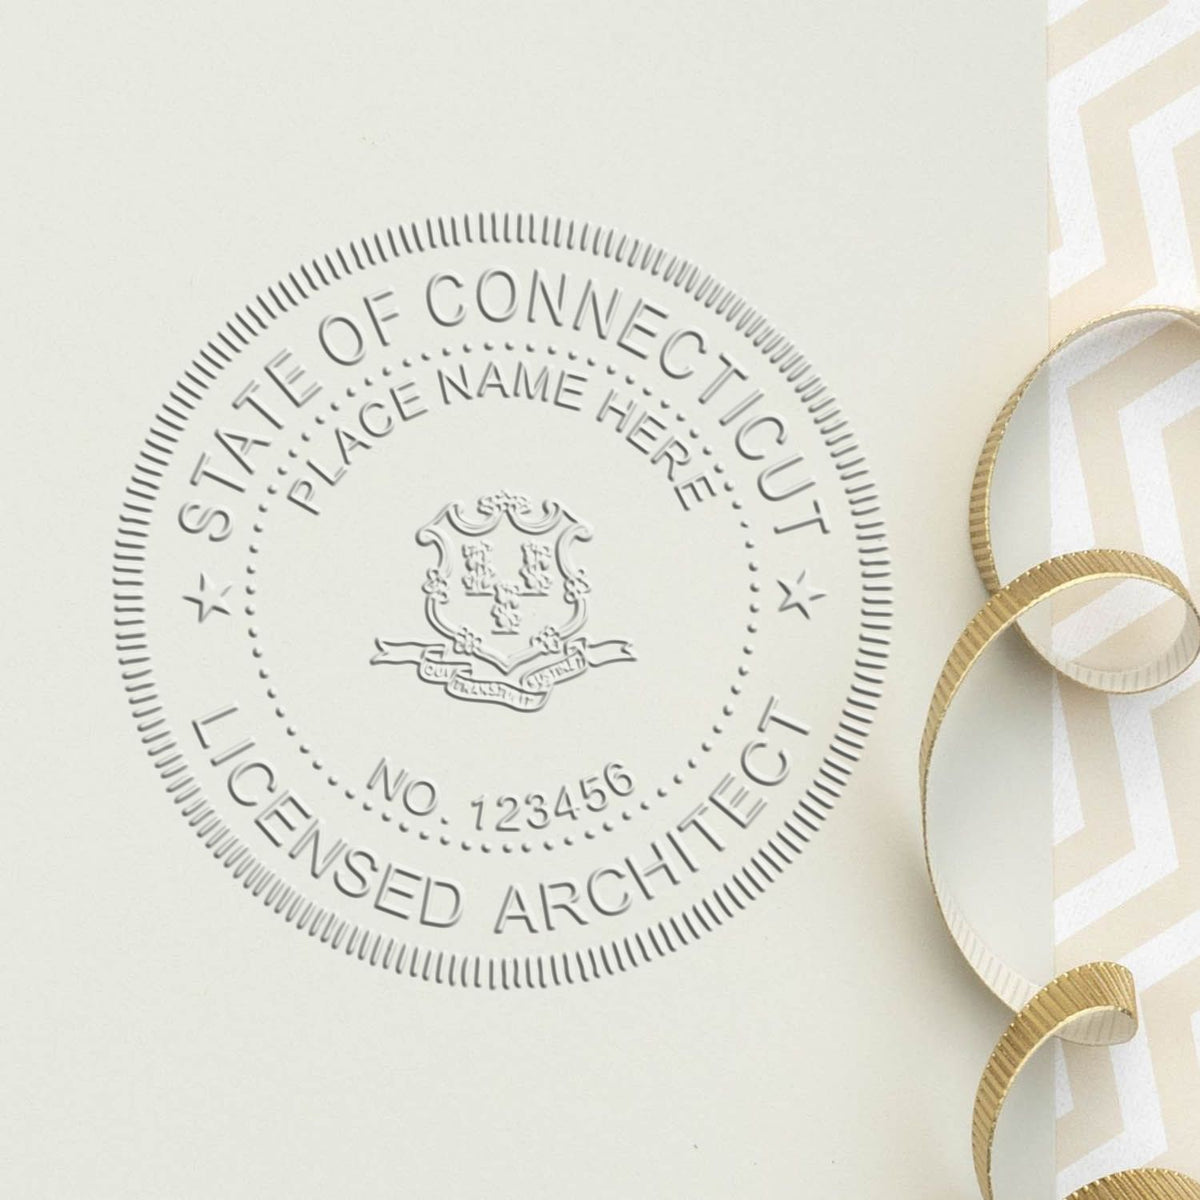 The State of Connecticut Architectural Seal Embosser stamp impression comes to life with a crisp, detailed photo on paper - showcasing true professional quality.